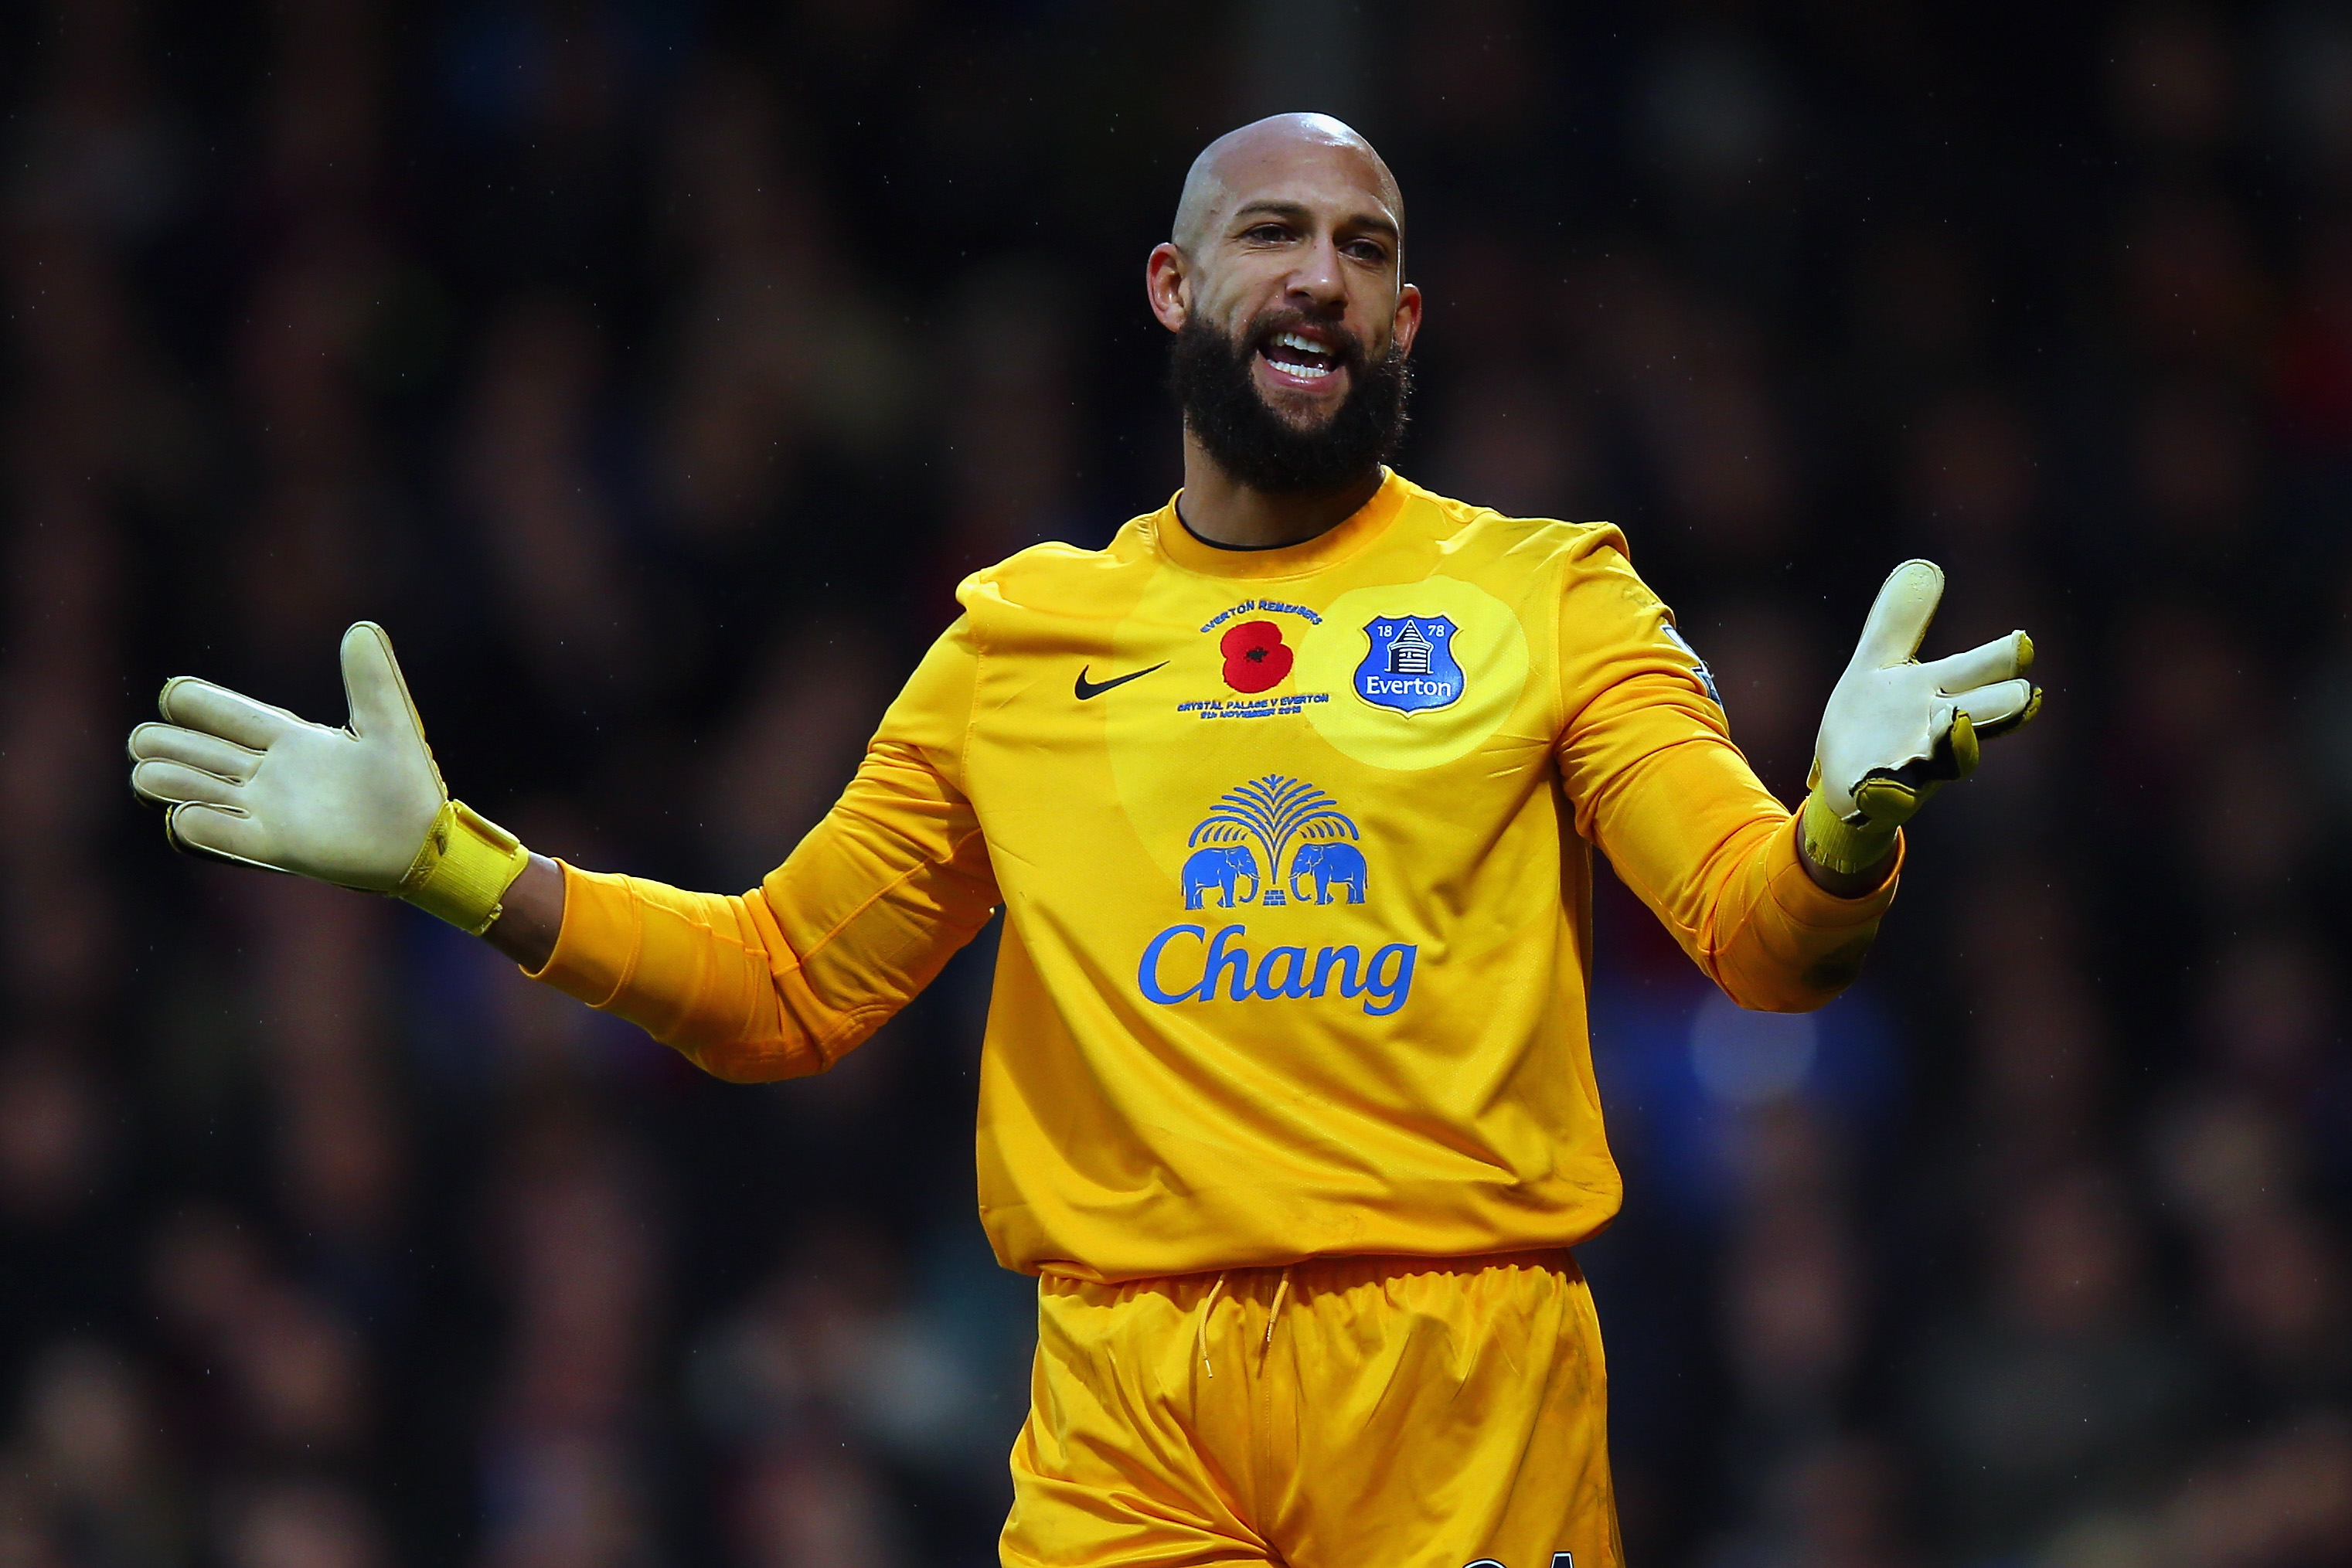 Tim Howard of Everton instructs his team during the Barclays Premier League match between Crystal Palace and Everton at Selhurst Park on November 9, 2013 in London, England. (Bryn Lennon—Getty Images)